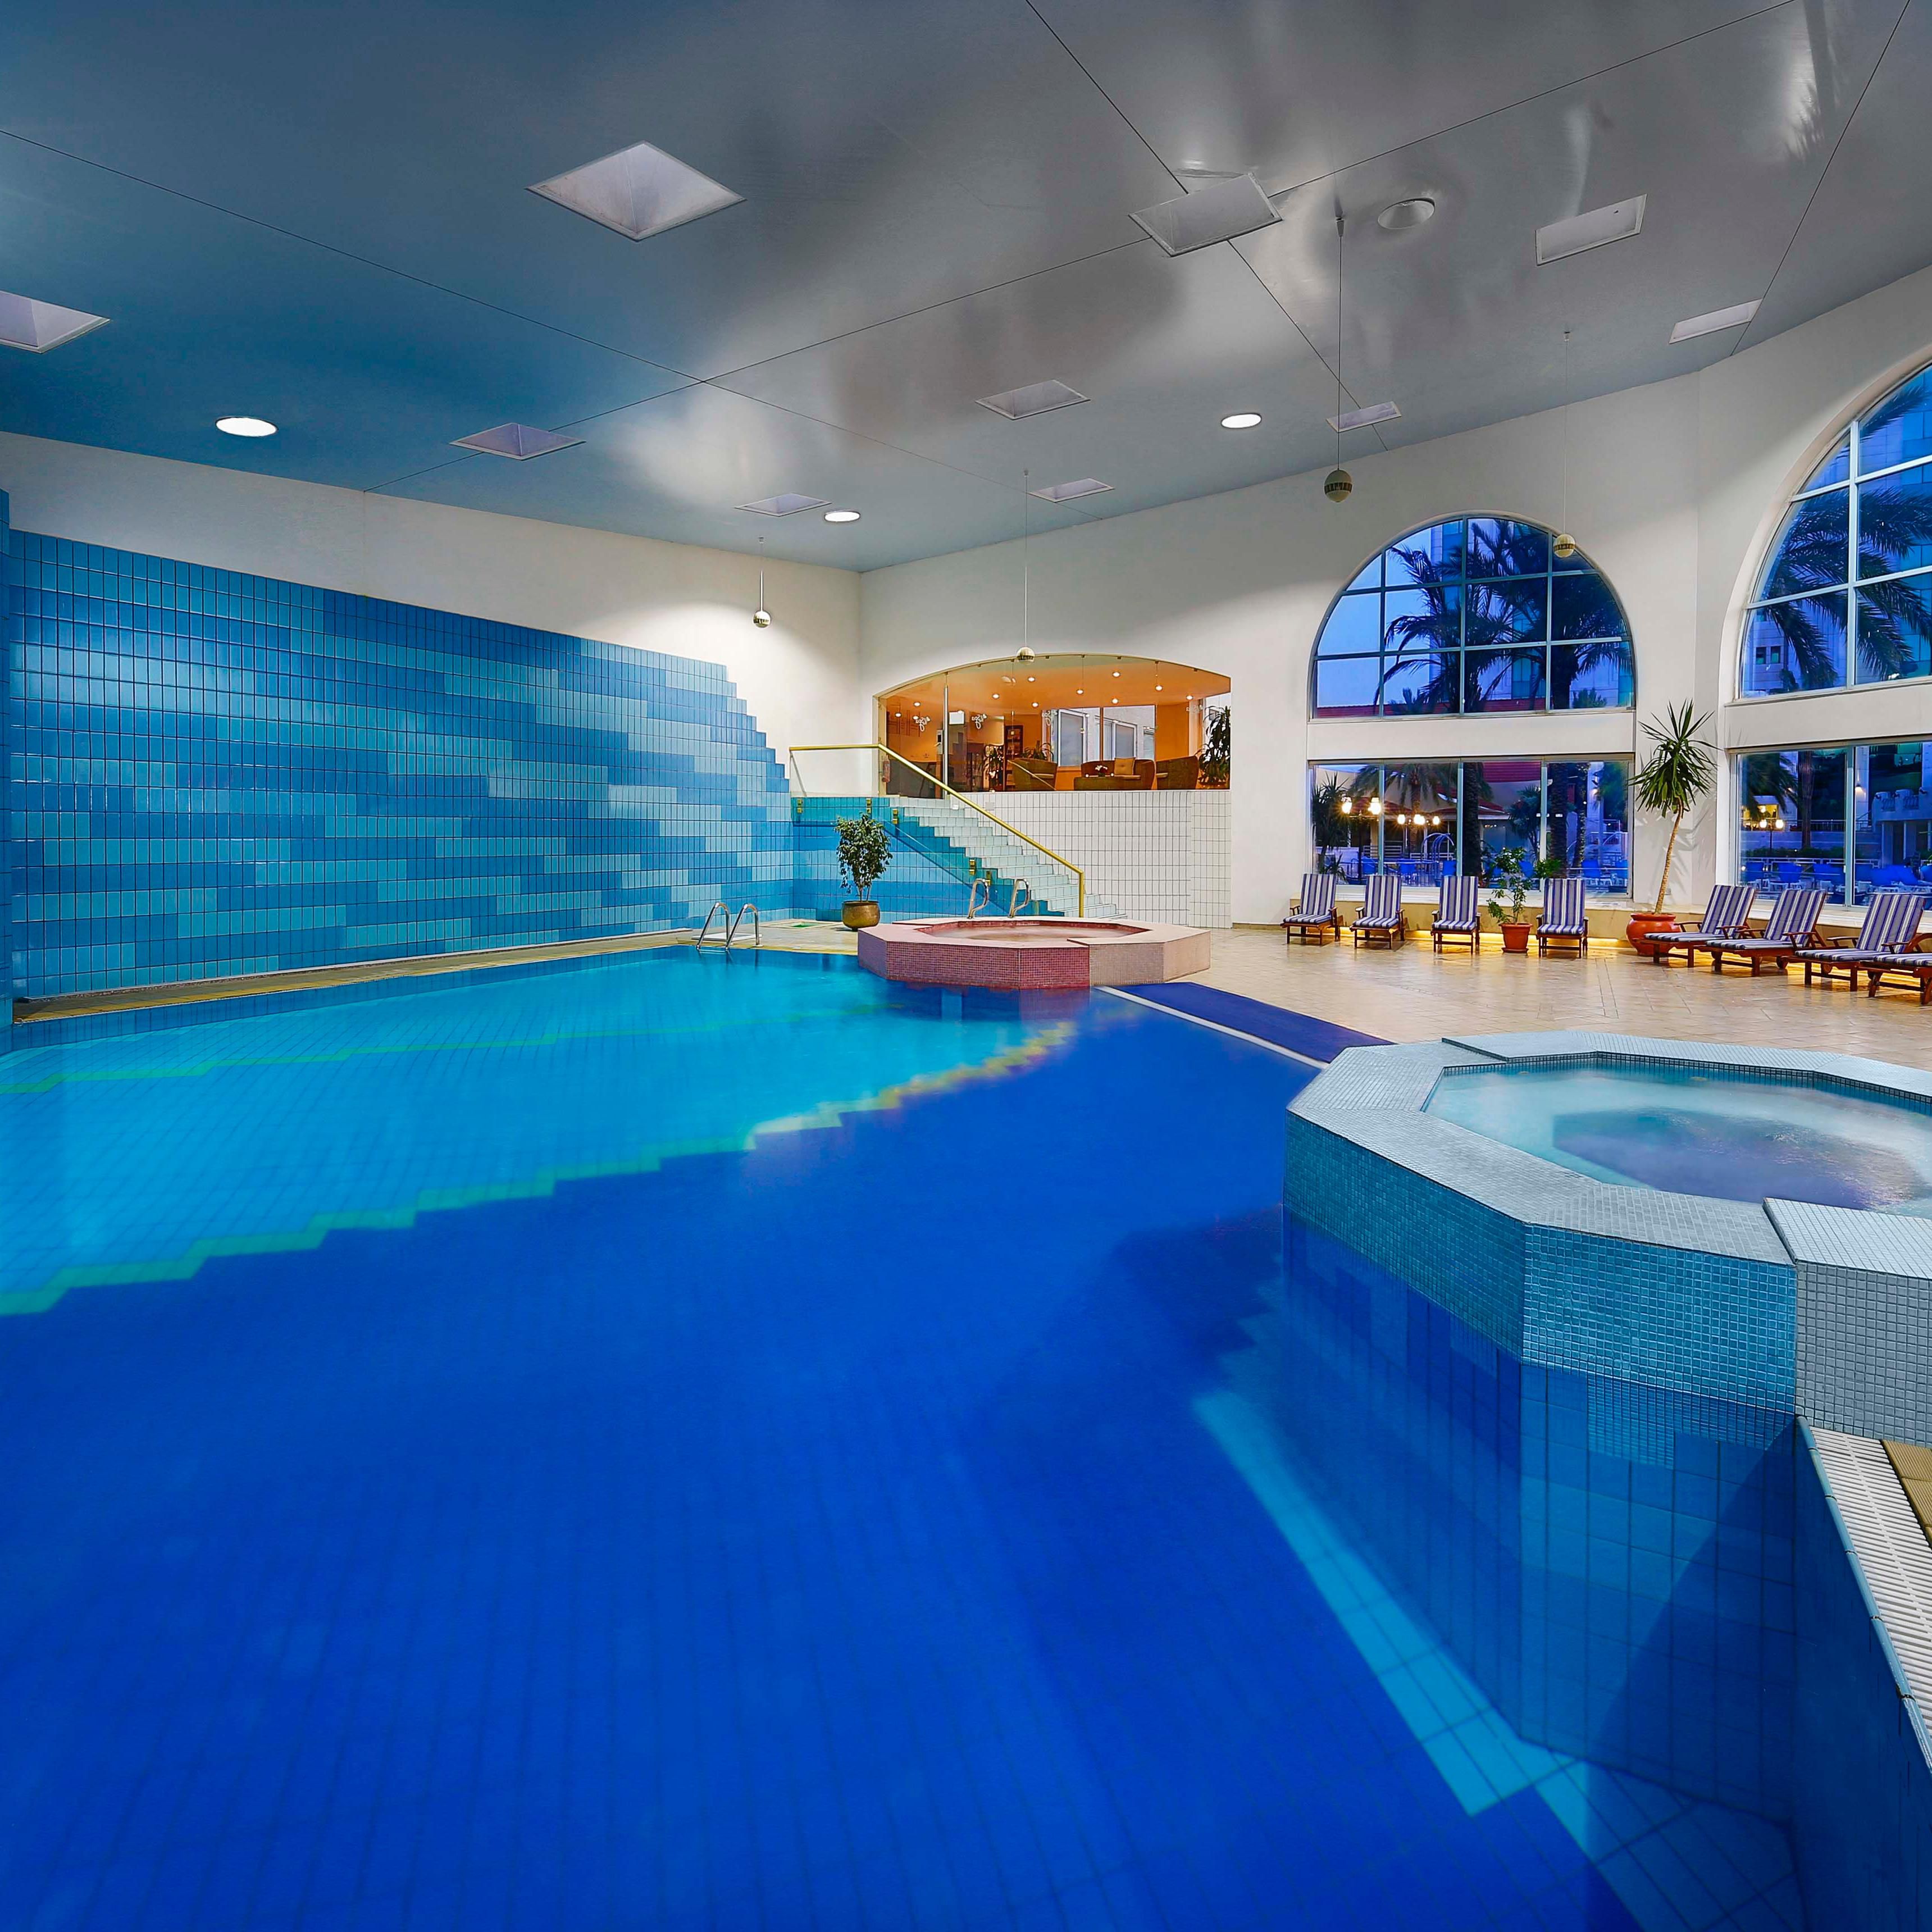 Take a leisurely swim in our all year heated indoor pool